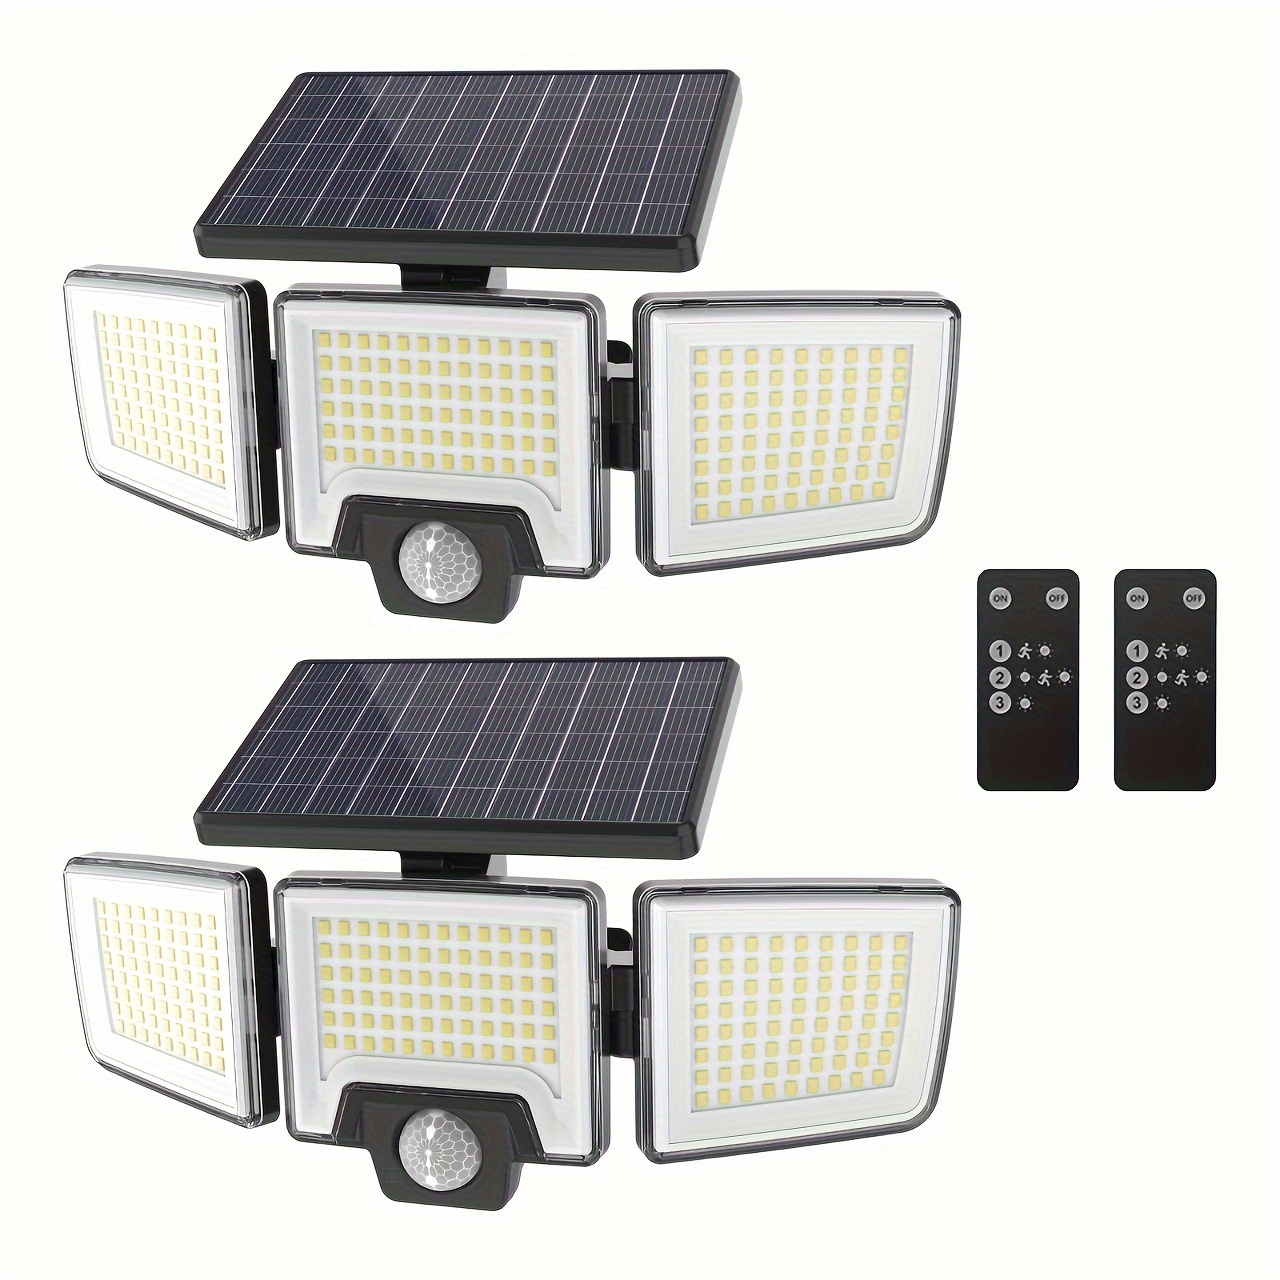 

2pc Solar Outdoor Lights, 216leds 3000lm Motion Sensor Lights 6500k Solar Powered Lights, 4 Heads Security Flood Lights, Waterproof 300° Wide Angle Wall Lights With 3 Modes For Garden